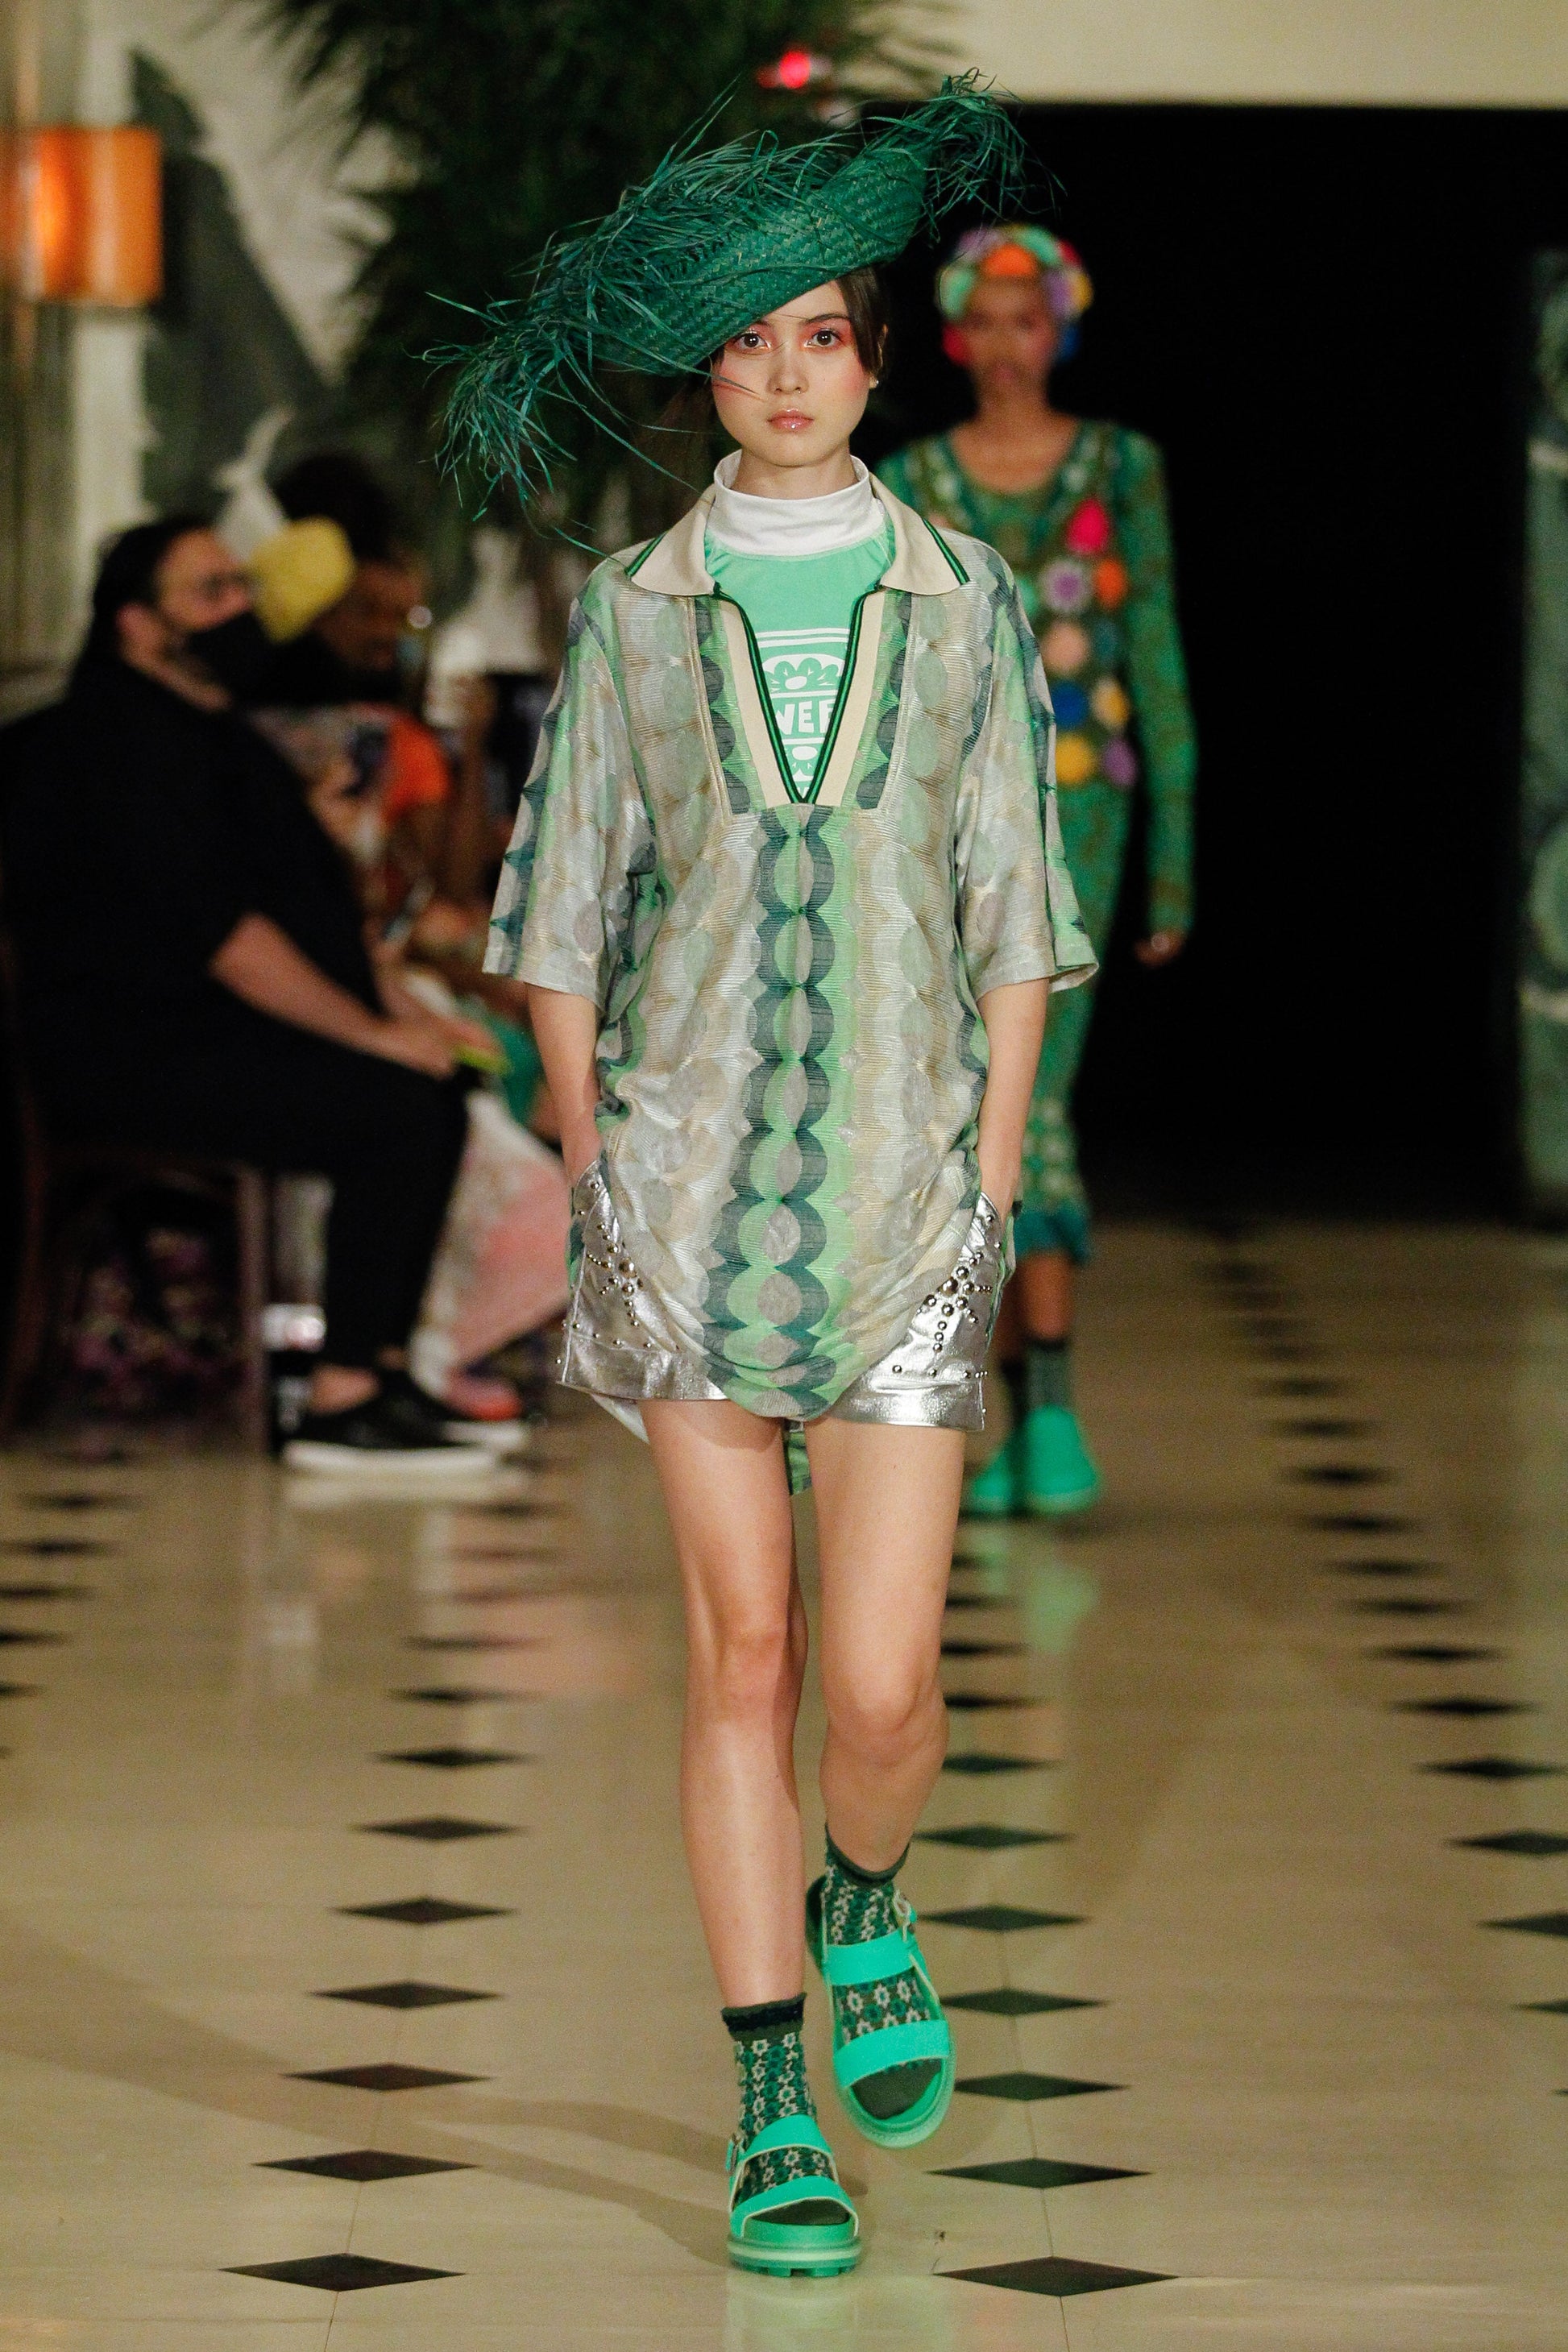 Neon Spandex Surf Top, under the runway lights, can be worn with any green other Anna Sui attire